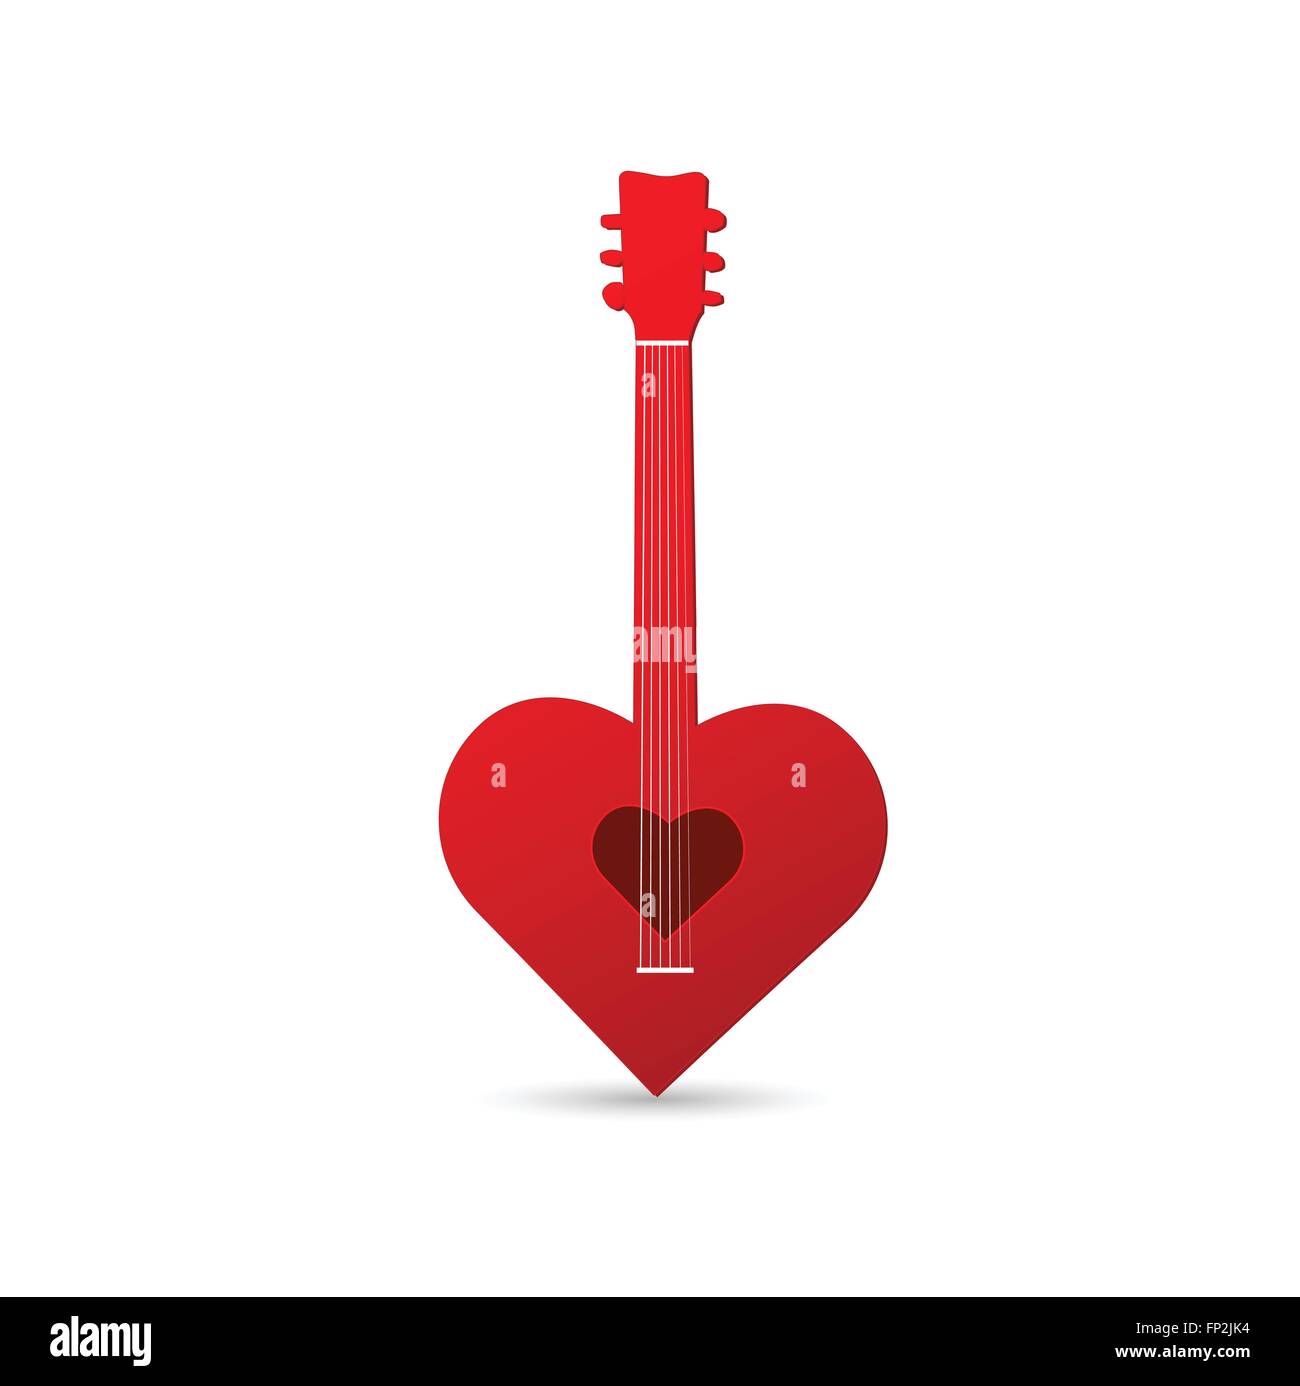 Illustration of a heart guitar isolated on a white background. Stock Vector